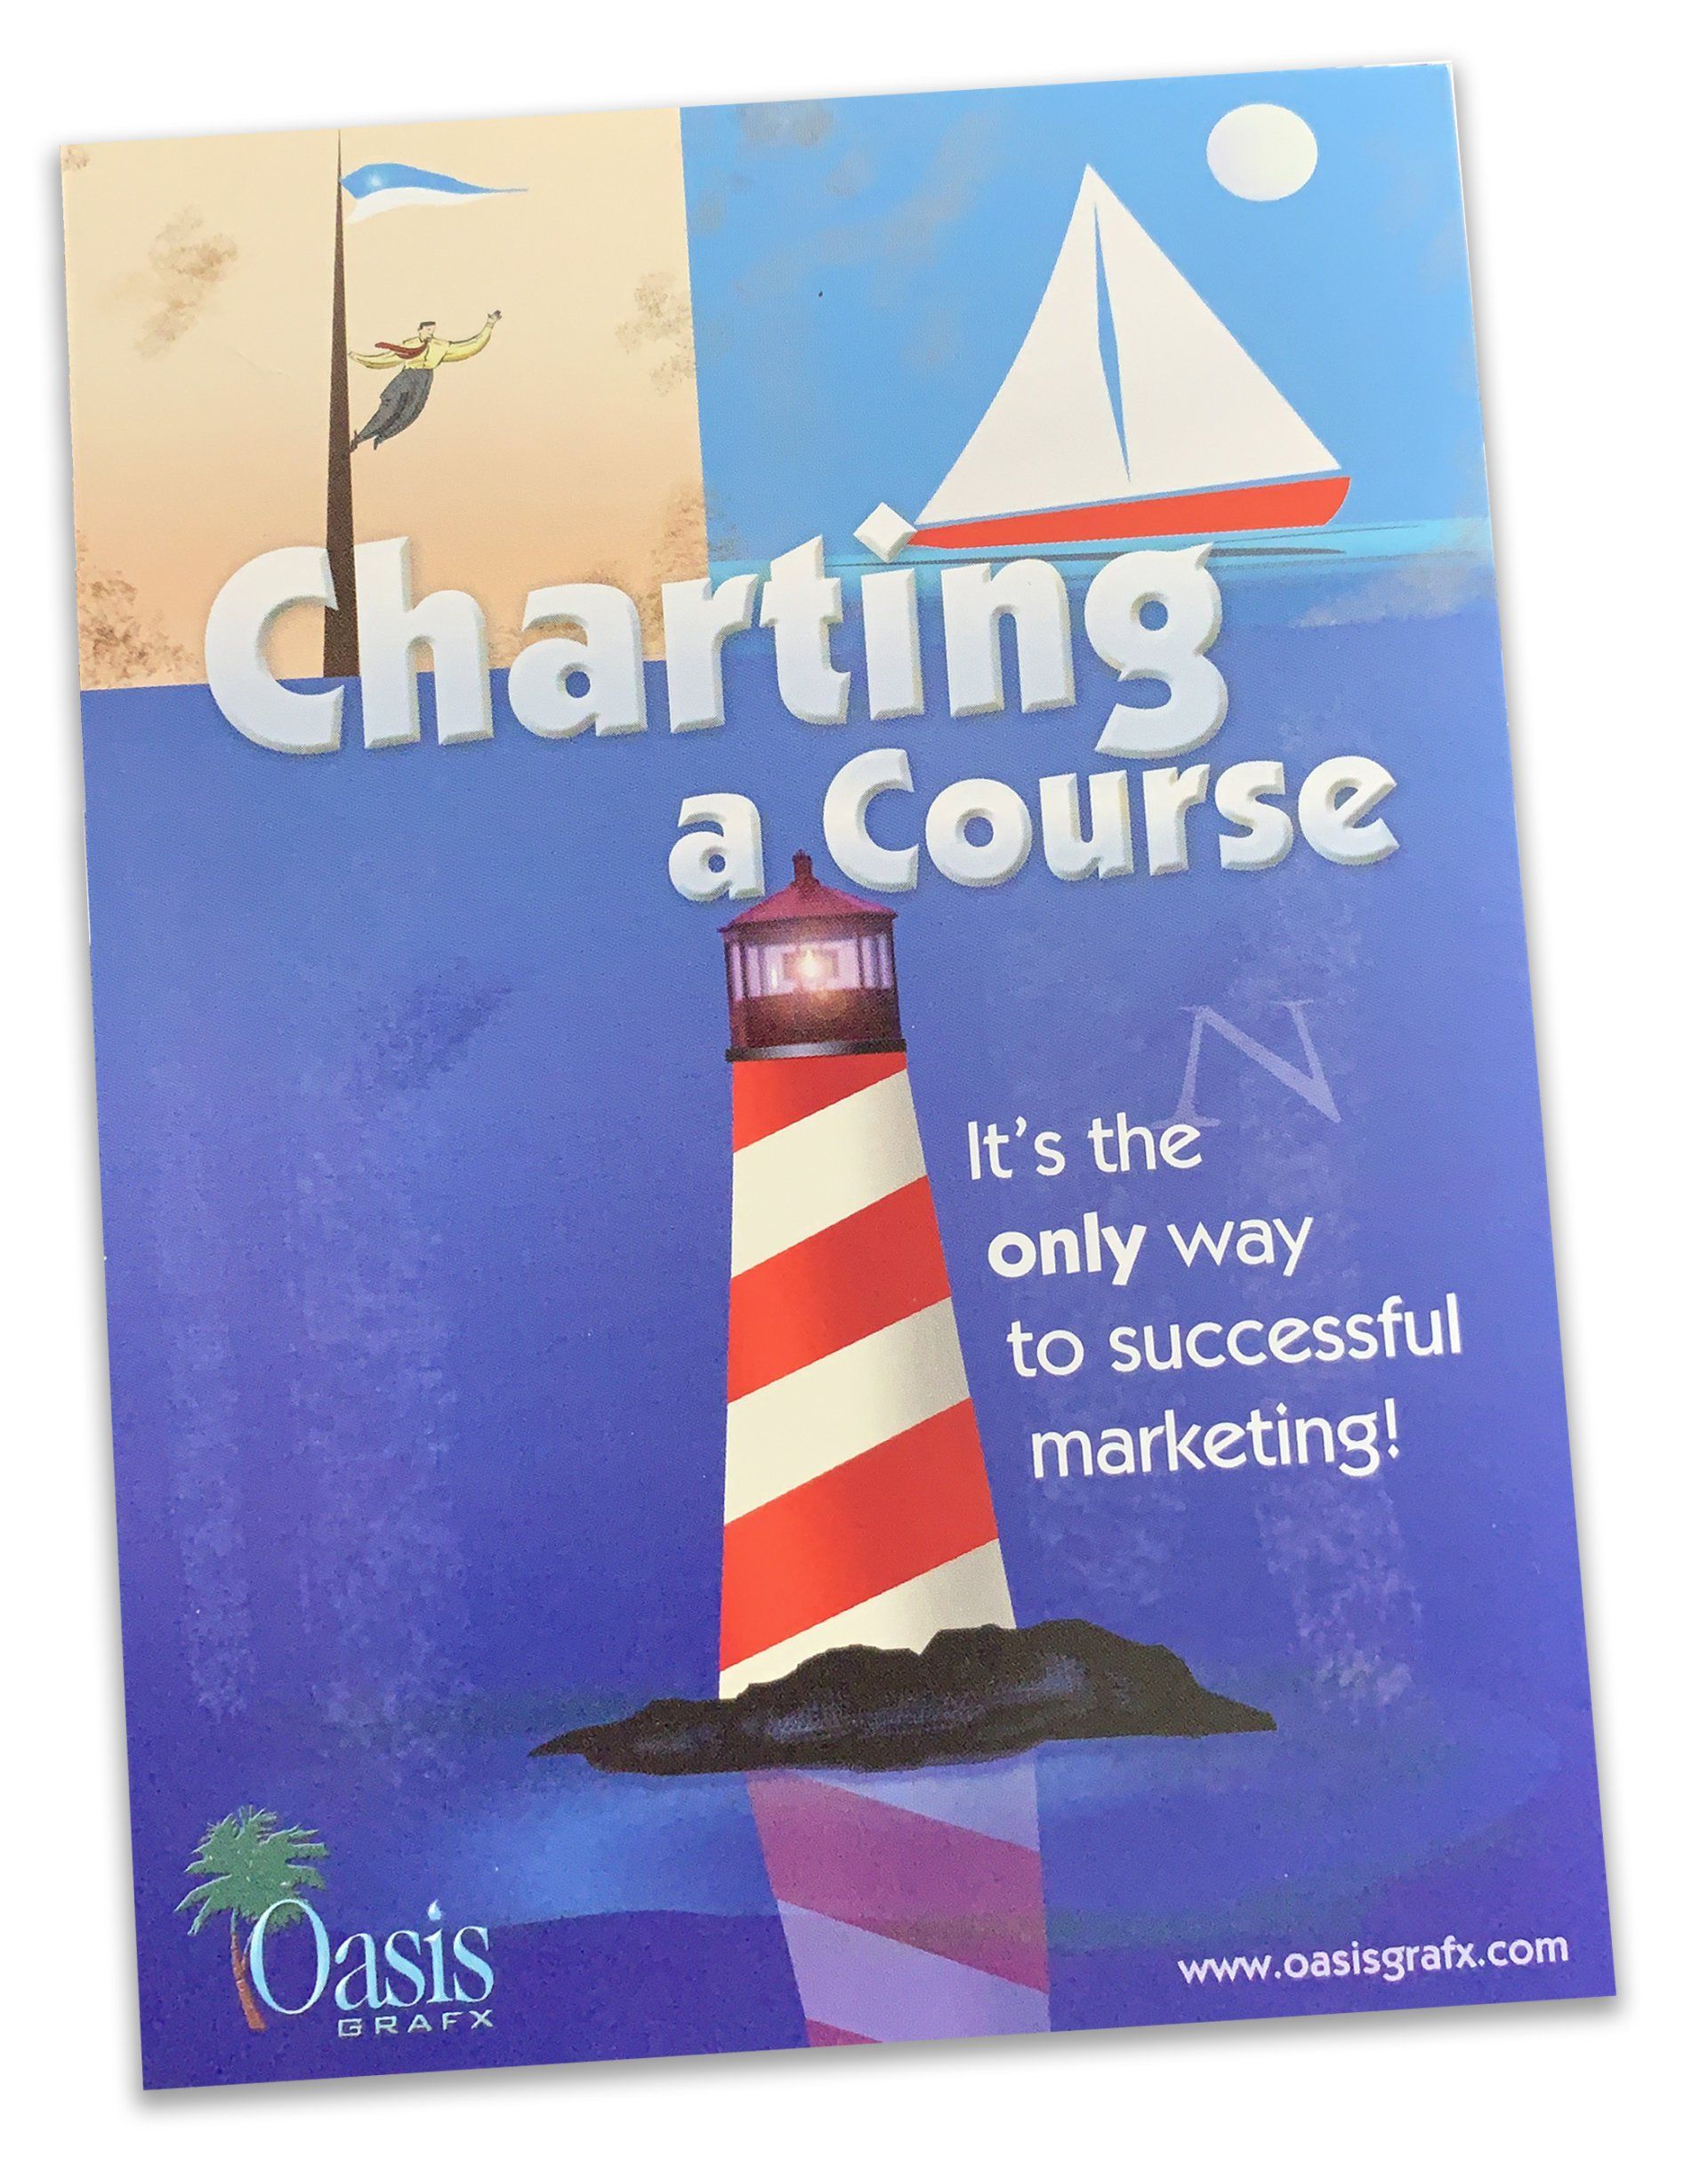 A book titled charting a course has a lighthouse on the cover